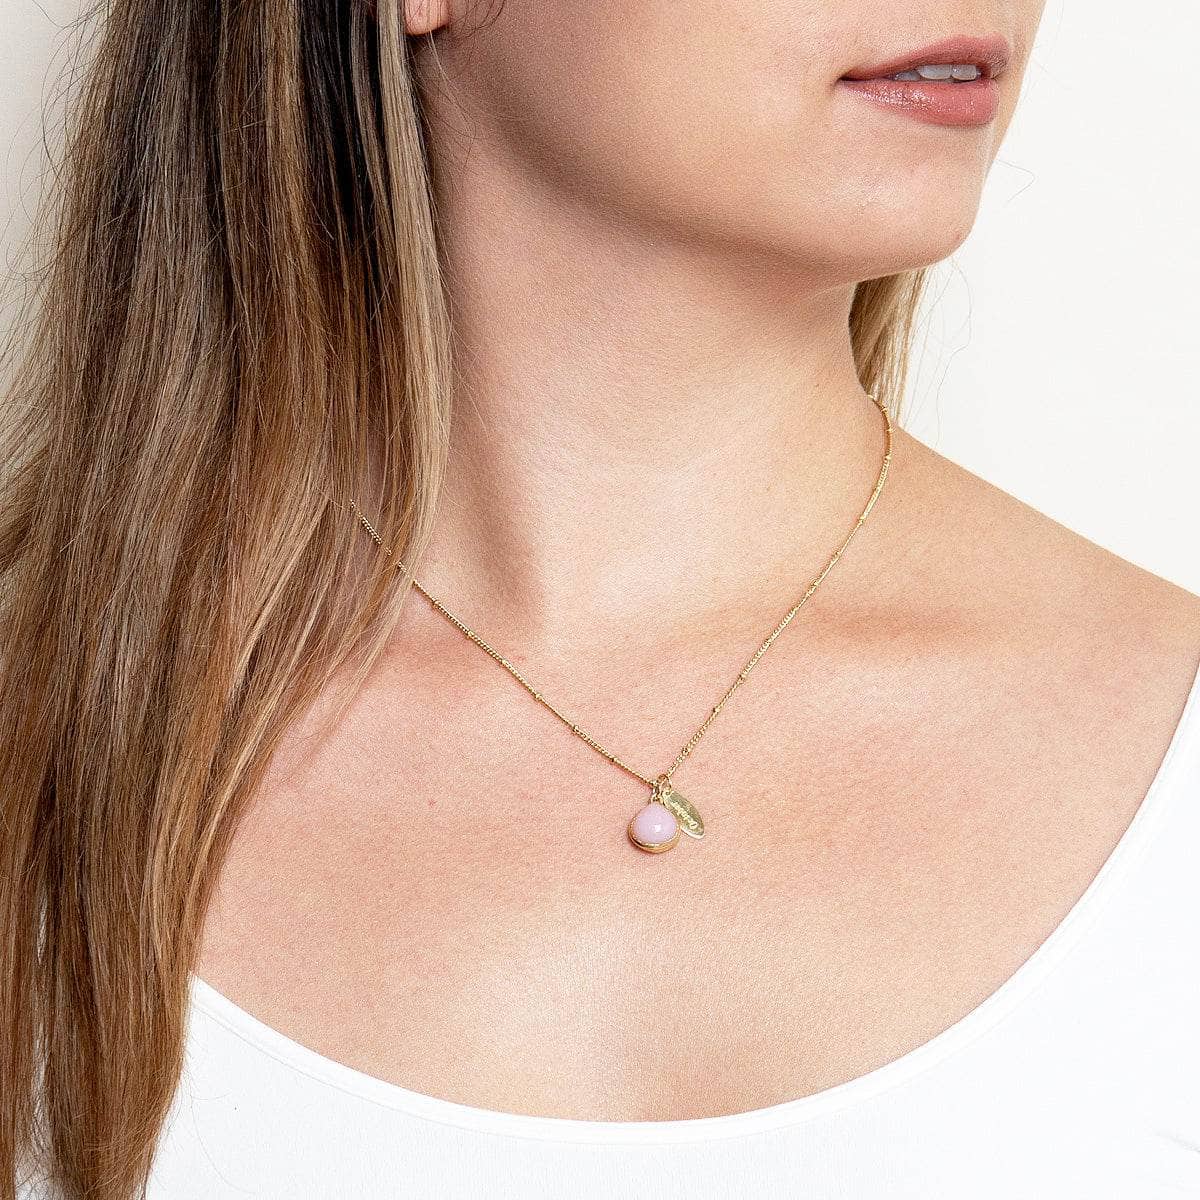 October Pink Opal Birthstone Necklace by Tiny Rituals